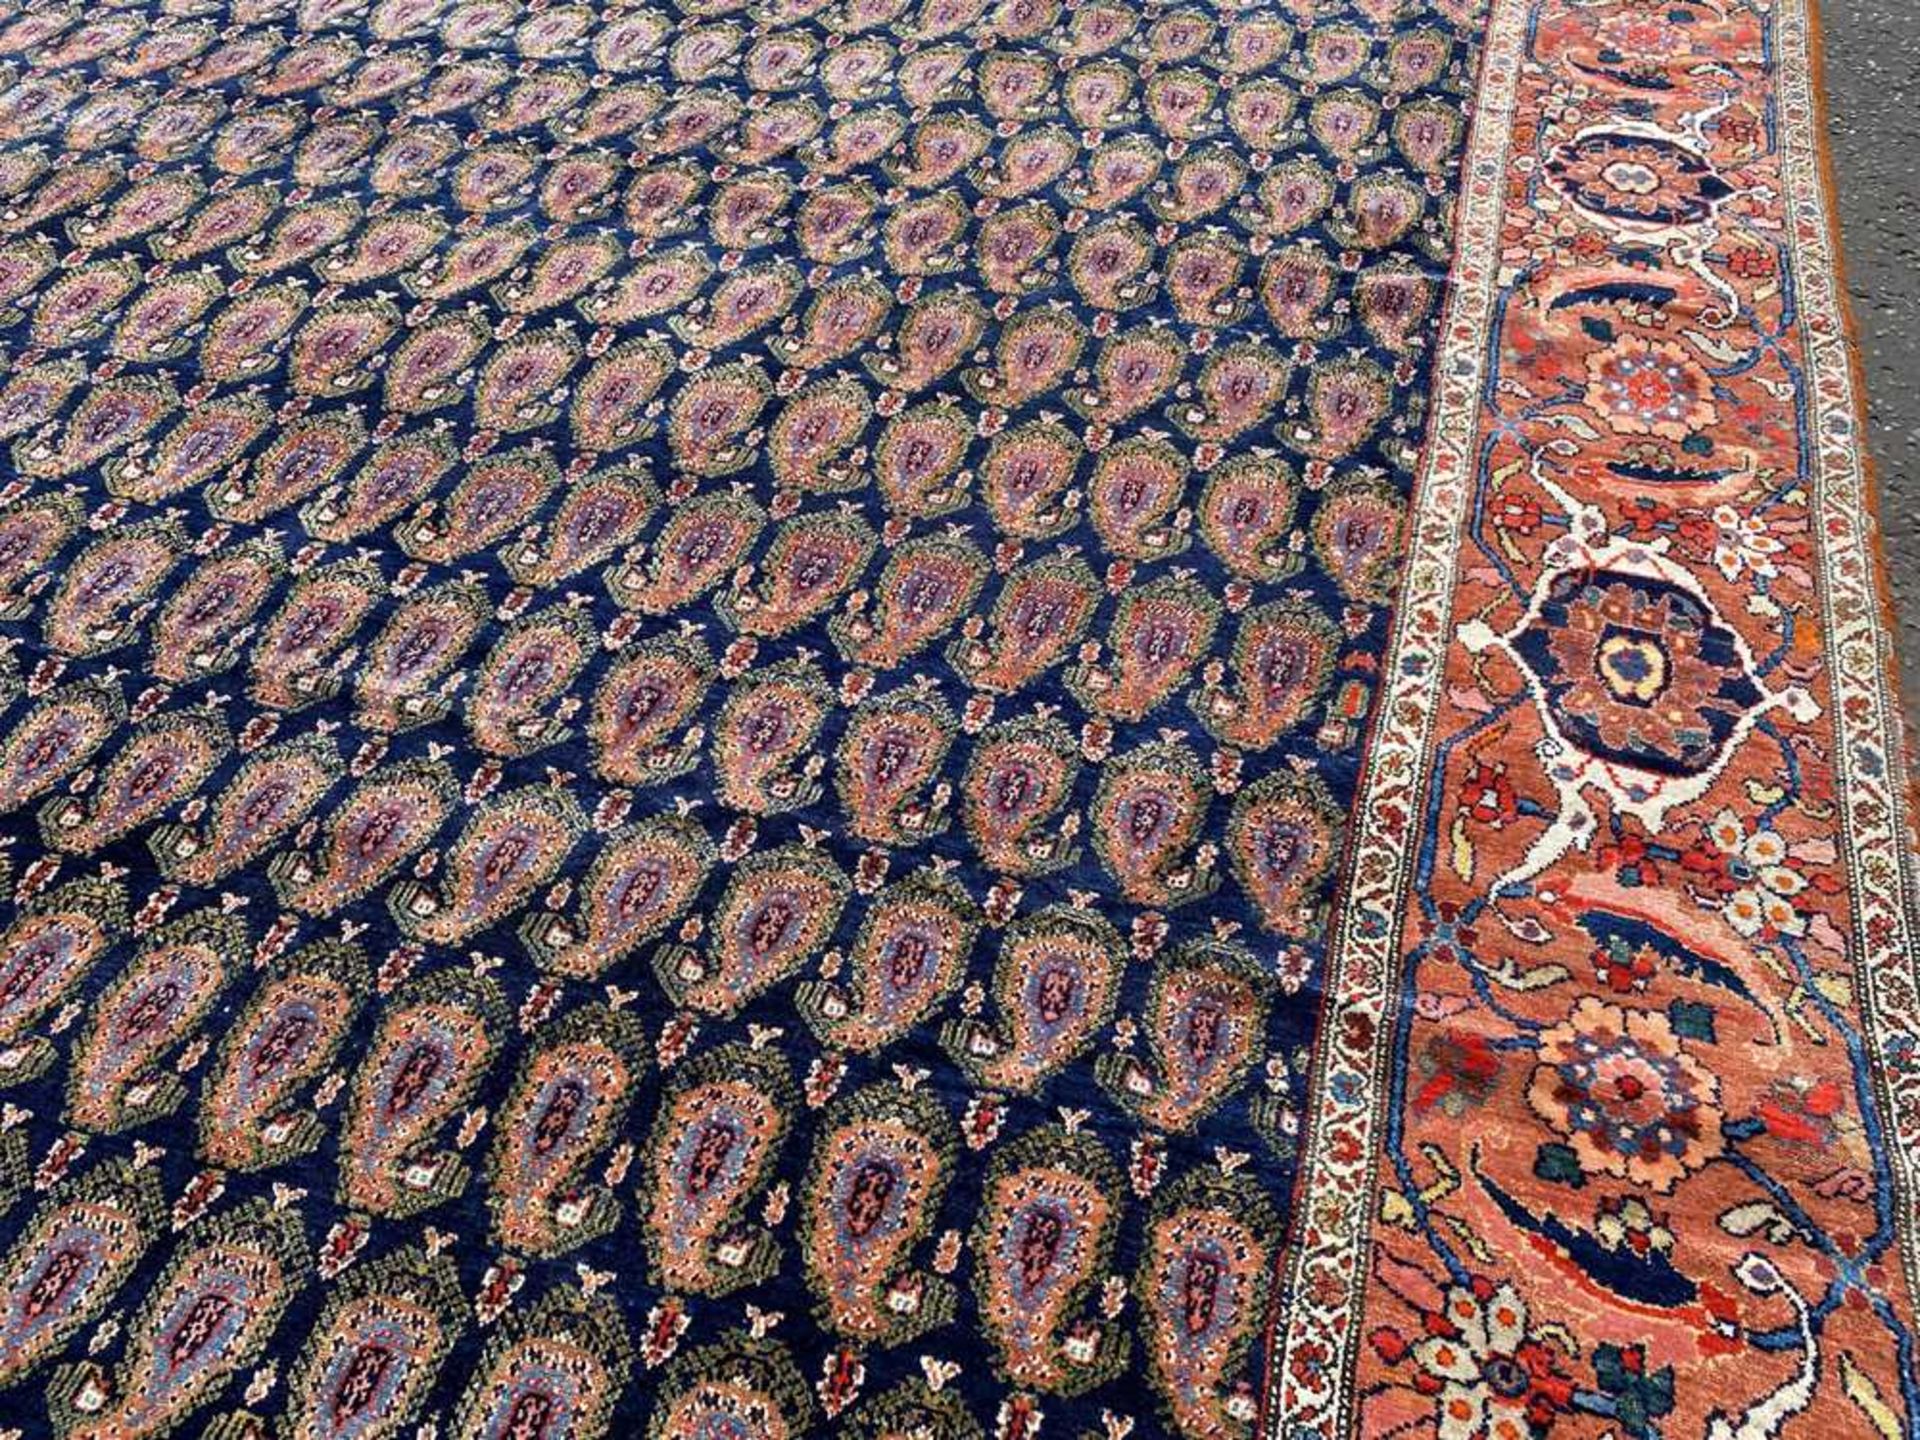 LARGE BAKHTIARI CARPET WEST PERSIA, LATE 19TH/EARLY 20TH CENTURY - Image 5 of 8